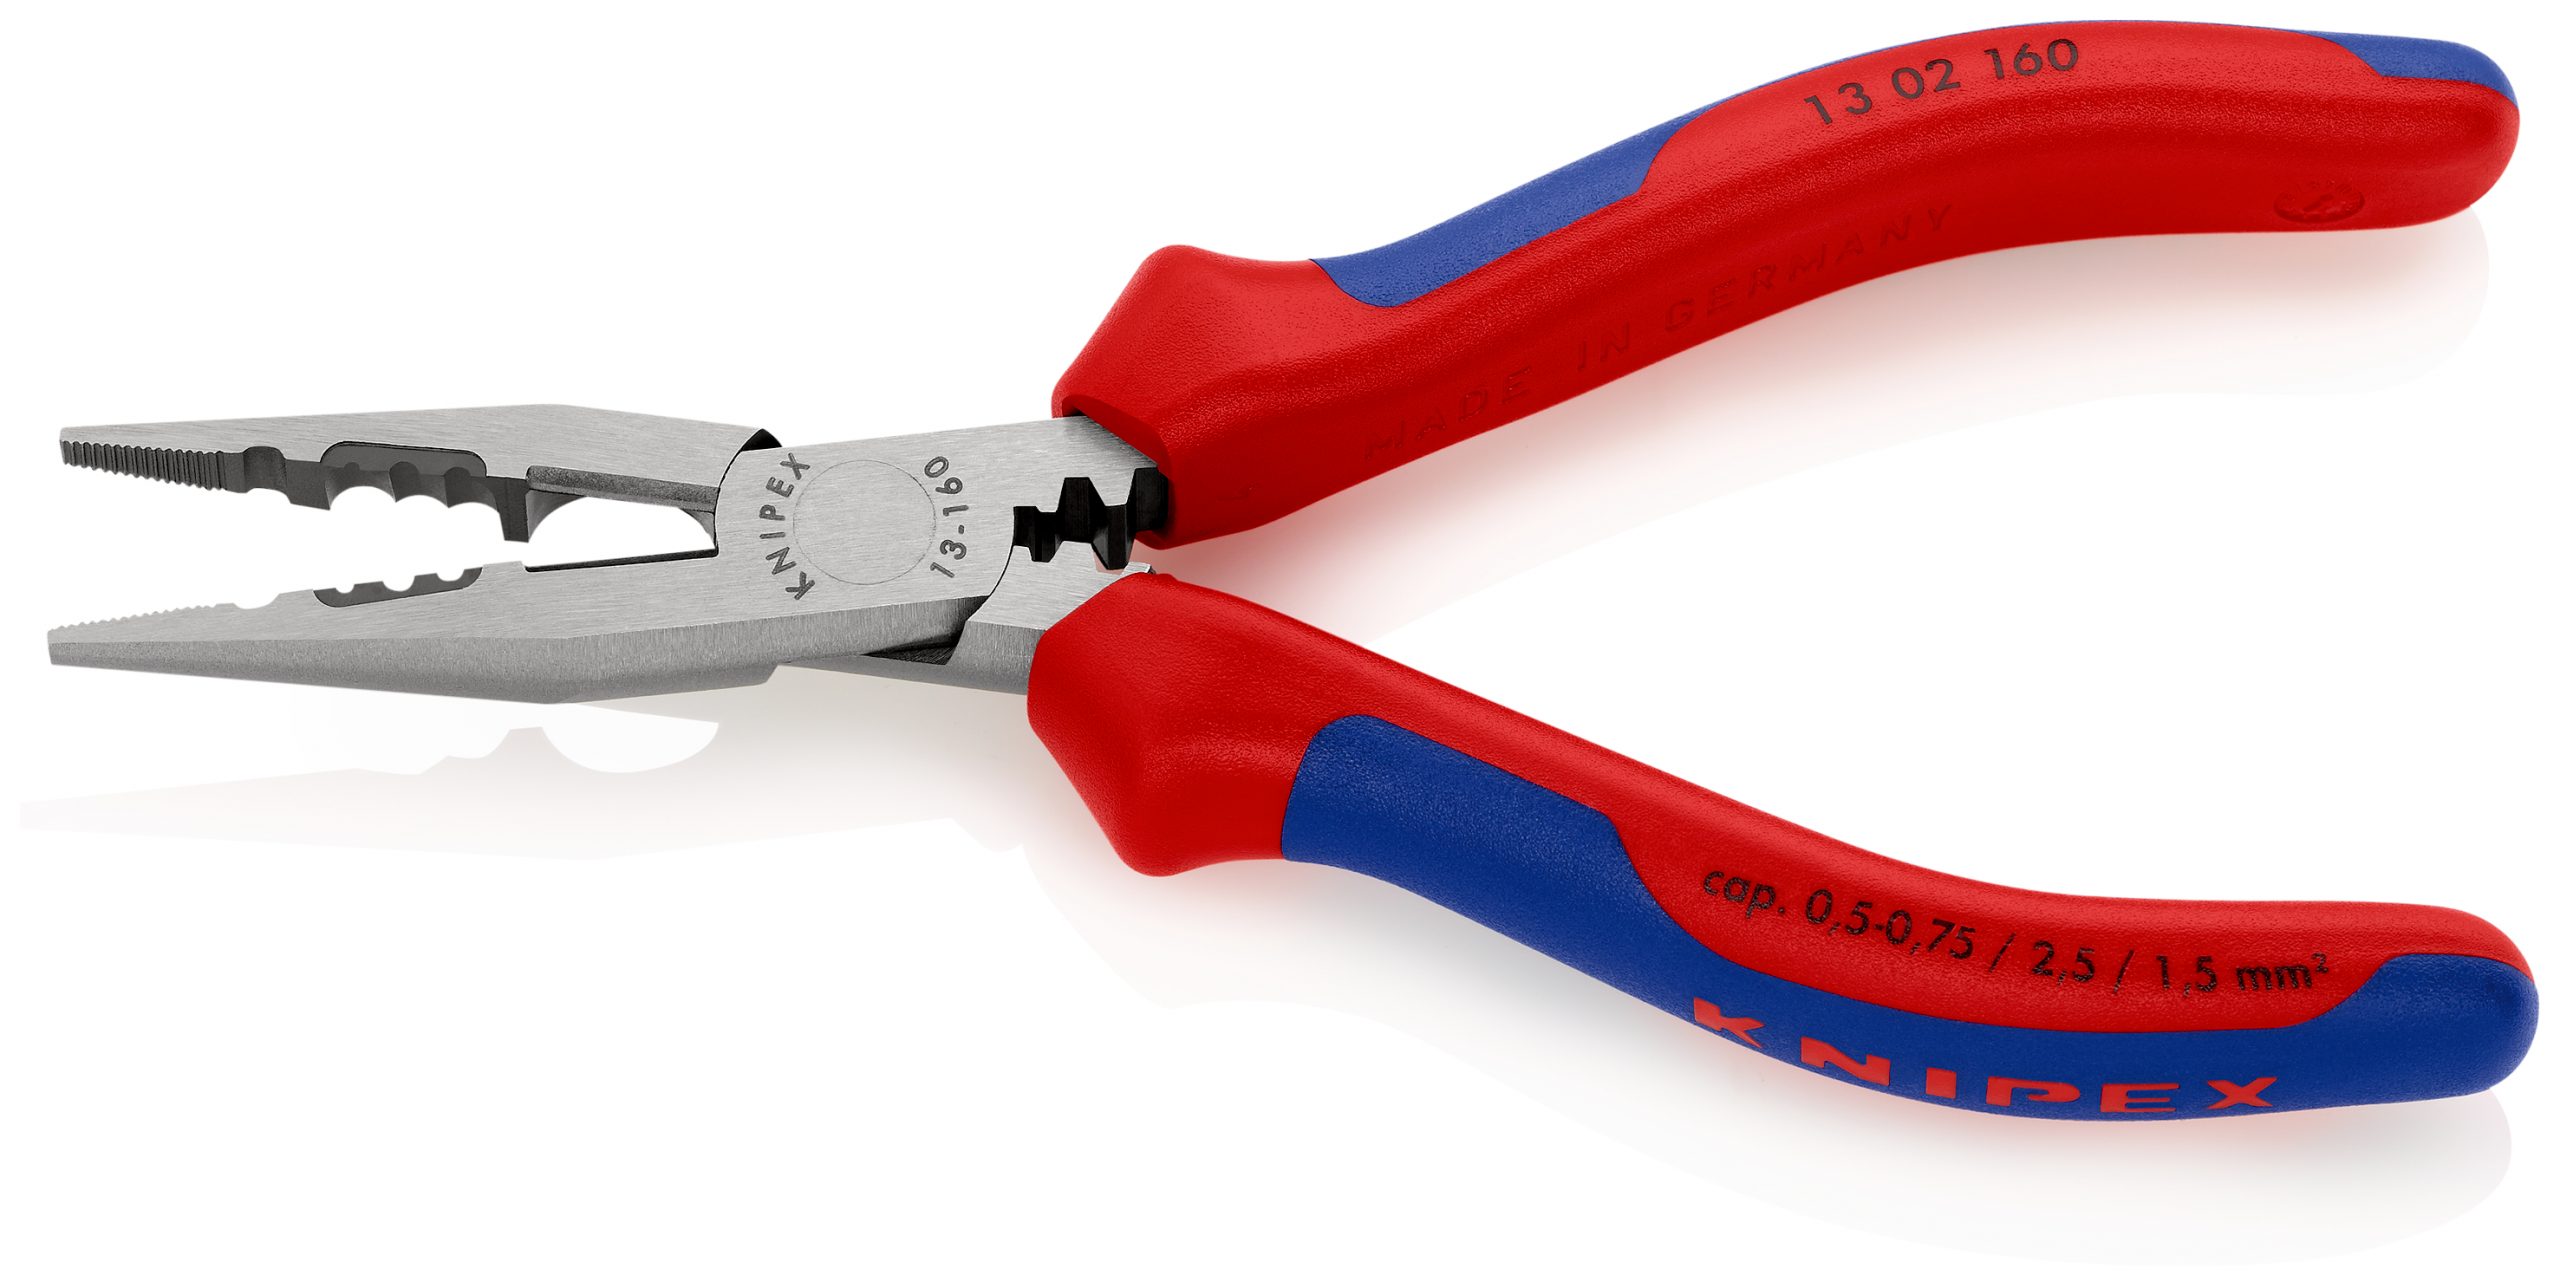 Knipex 13 02 160 Electrician's Long Nose Pliers Multi-Component